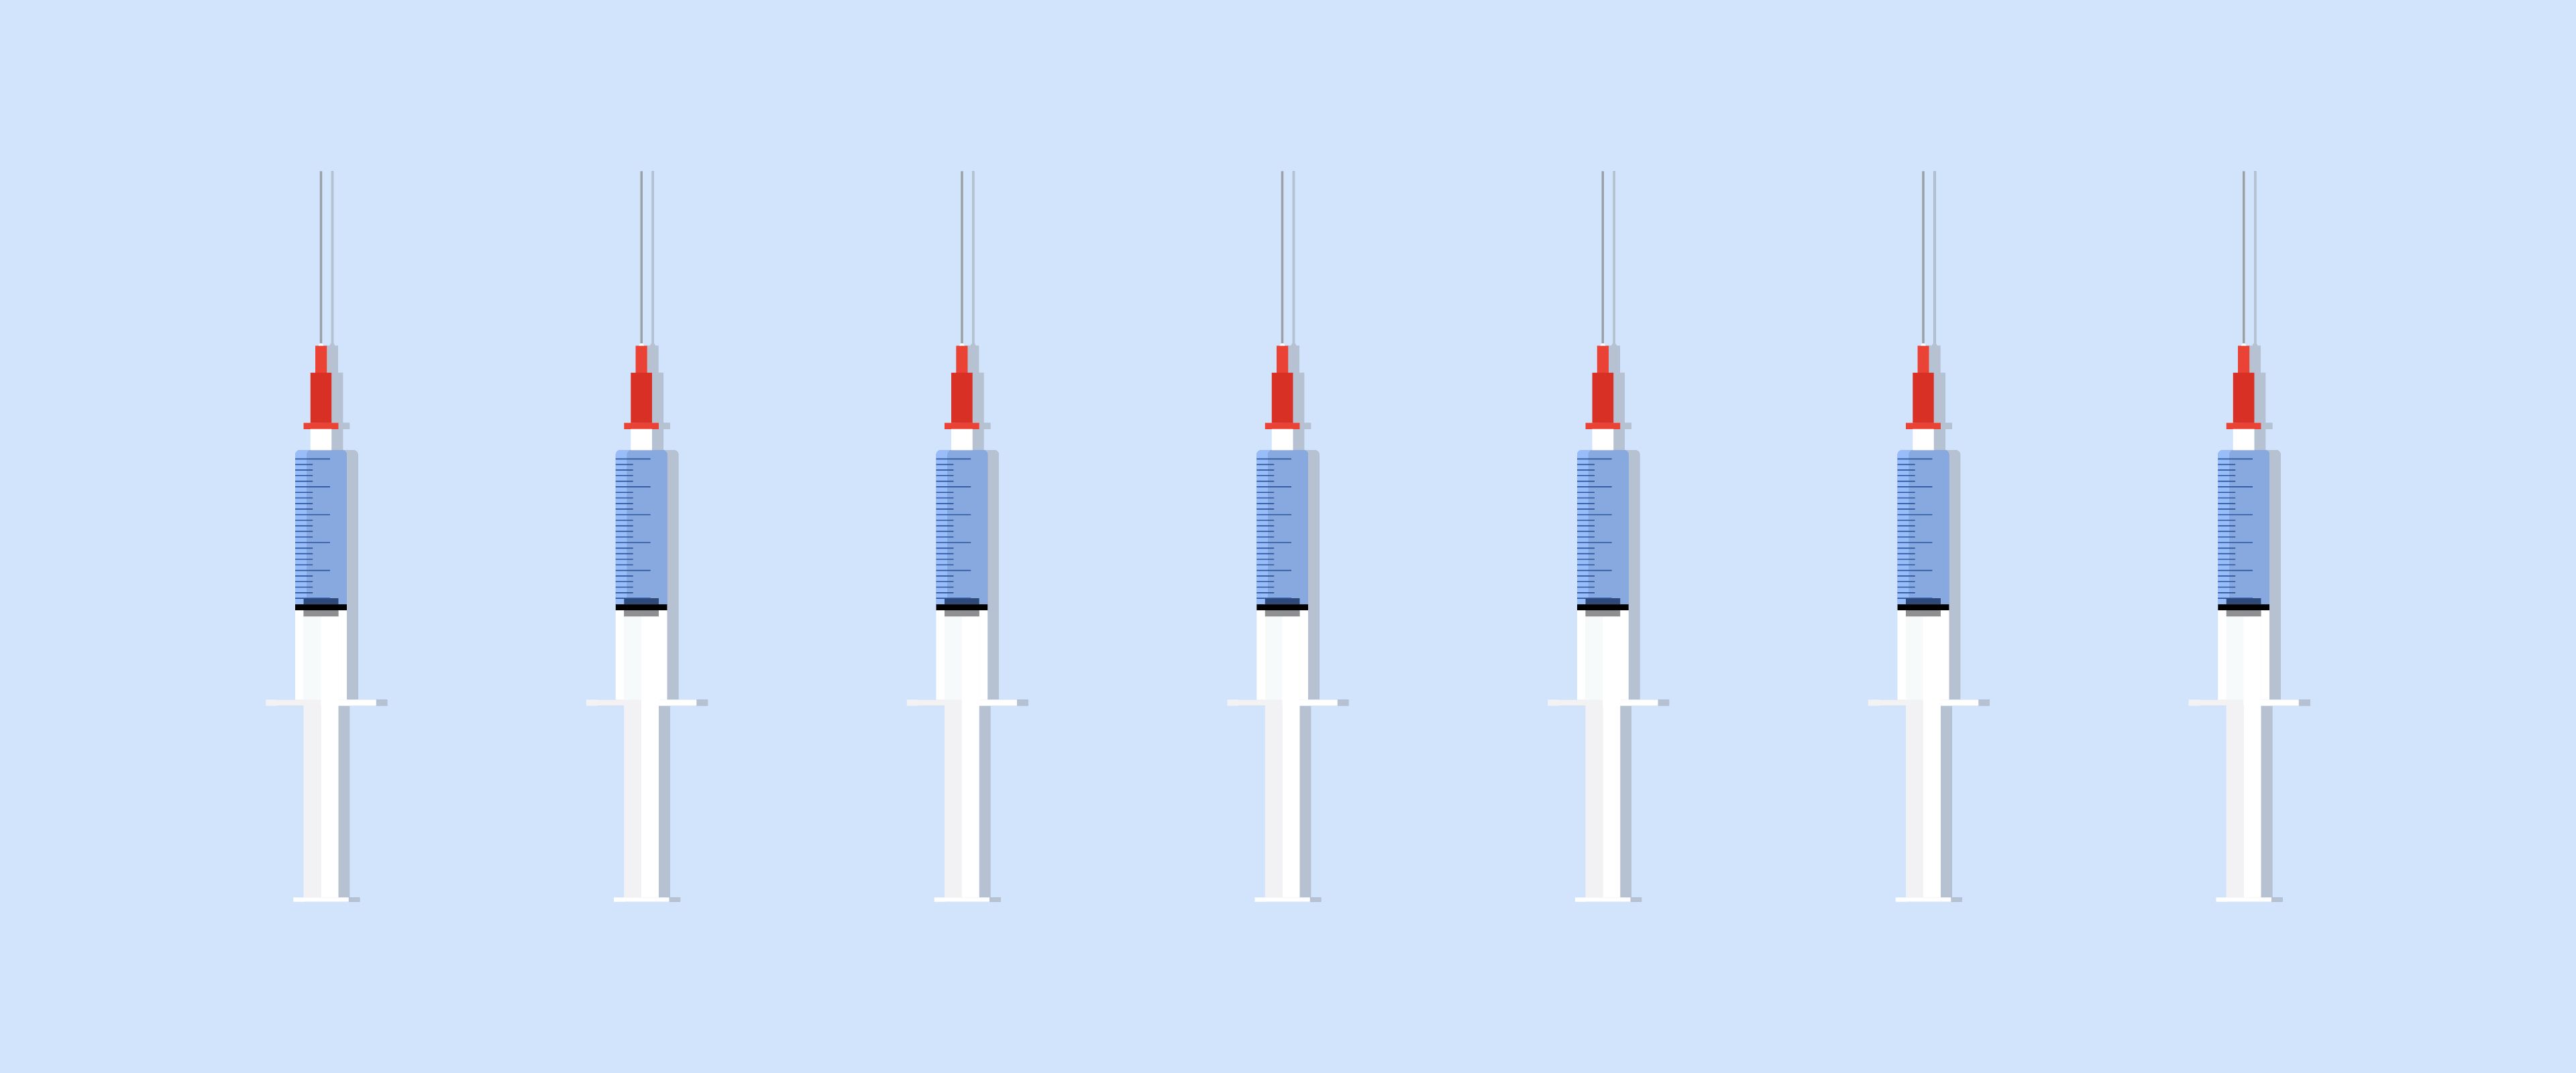 A line of syringes, representing potential vaccines